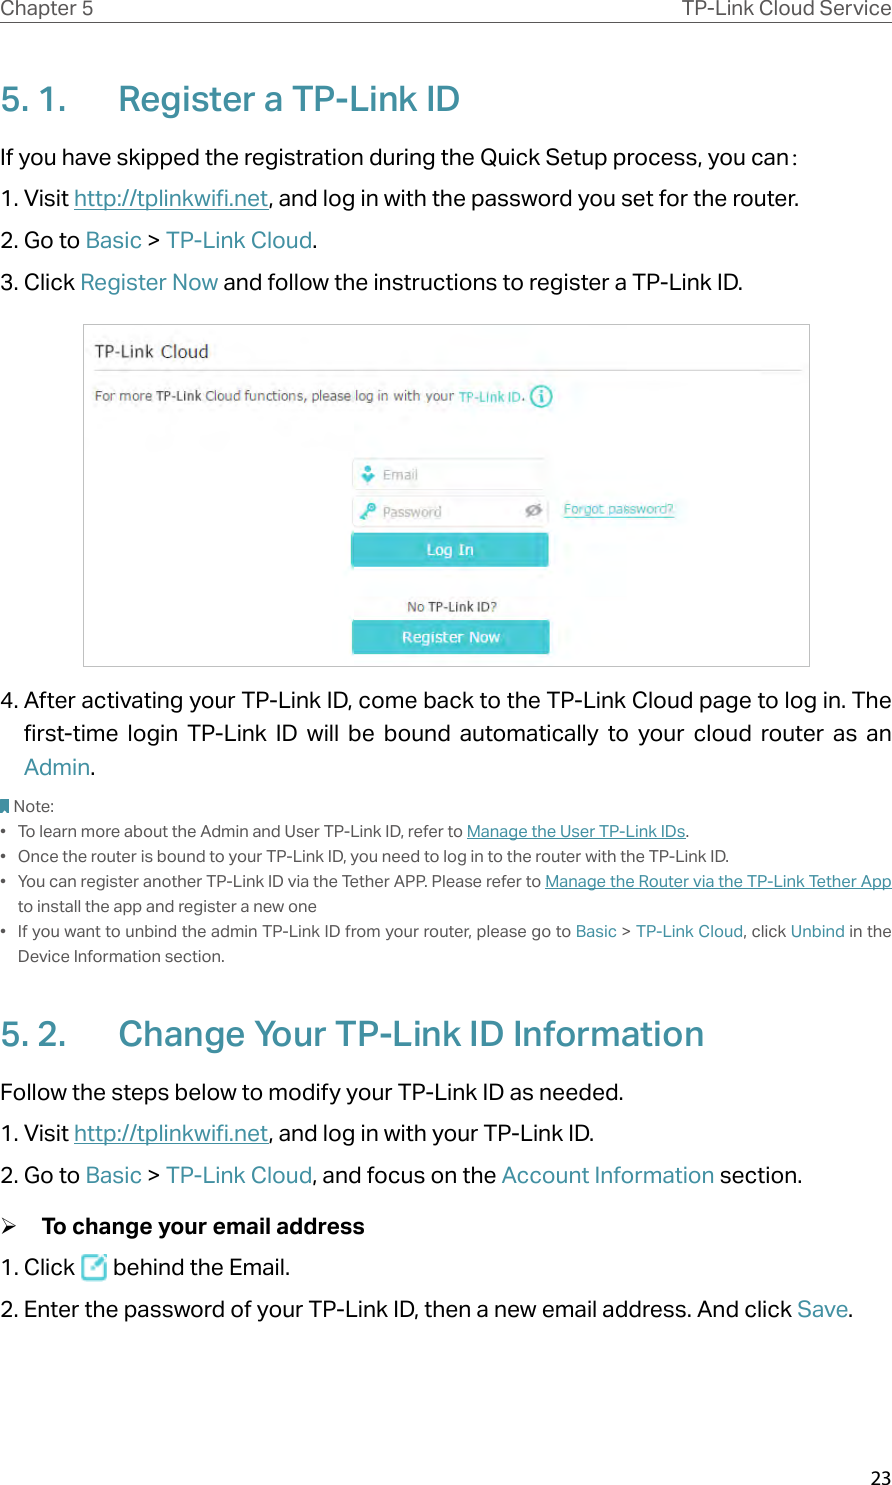 23Chapter 5 TP-Link Cloud Service5. 1.  Register a TP-Link IDIf you have skipped the registration during the Quick Setup process, you can：1. Visit http://tplinkwifi.net, and log in with the password you set for the router.2. Go to Basic &gt; TP-Link Cloud.3. Click Register Now and follow the instructions to register a TP-Link ID.4. After activating your TP-Link ID, come back to the TP-Link Cloud page to log in. The first-time login TP-Link ID will be bound automatically to your cloud router as an Admin.Note:•  To learn more about the Admin and User TP-Link ID, refer to Manage the User TP-Link IDs.•  Once the router is bound to your TP-Link ID, you need to log in to the router with the TP-Link ID. •  You can register another TP-Link ID via the Tether APP. Please refer to Manage the Router via the TP-Link Tether App to install the app and register a new one•  If you want to unbind the admin TP-Link ID from your router, please go to Basic &gt; TP-Link Cloud, click Unbind in the Device Information section.5. 2.  Change Your TP-Link ID InformationFollow the steps below to modify your TP-Link ID as needed.1. Visit http://tplinkwifi.net, and log in with your TP-Link ID.2. Go to Basic &gt; TP-Link Cloud, and focus on the Account Information section. ¾To change your email address1. Click   behind the Email.2. Enter the password of your TP-Link ID, then a new email address. And click Save.